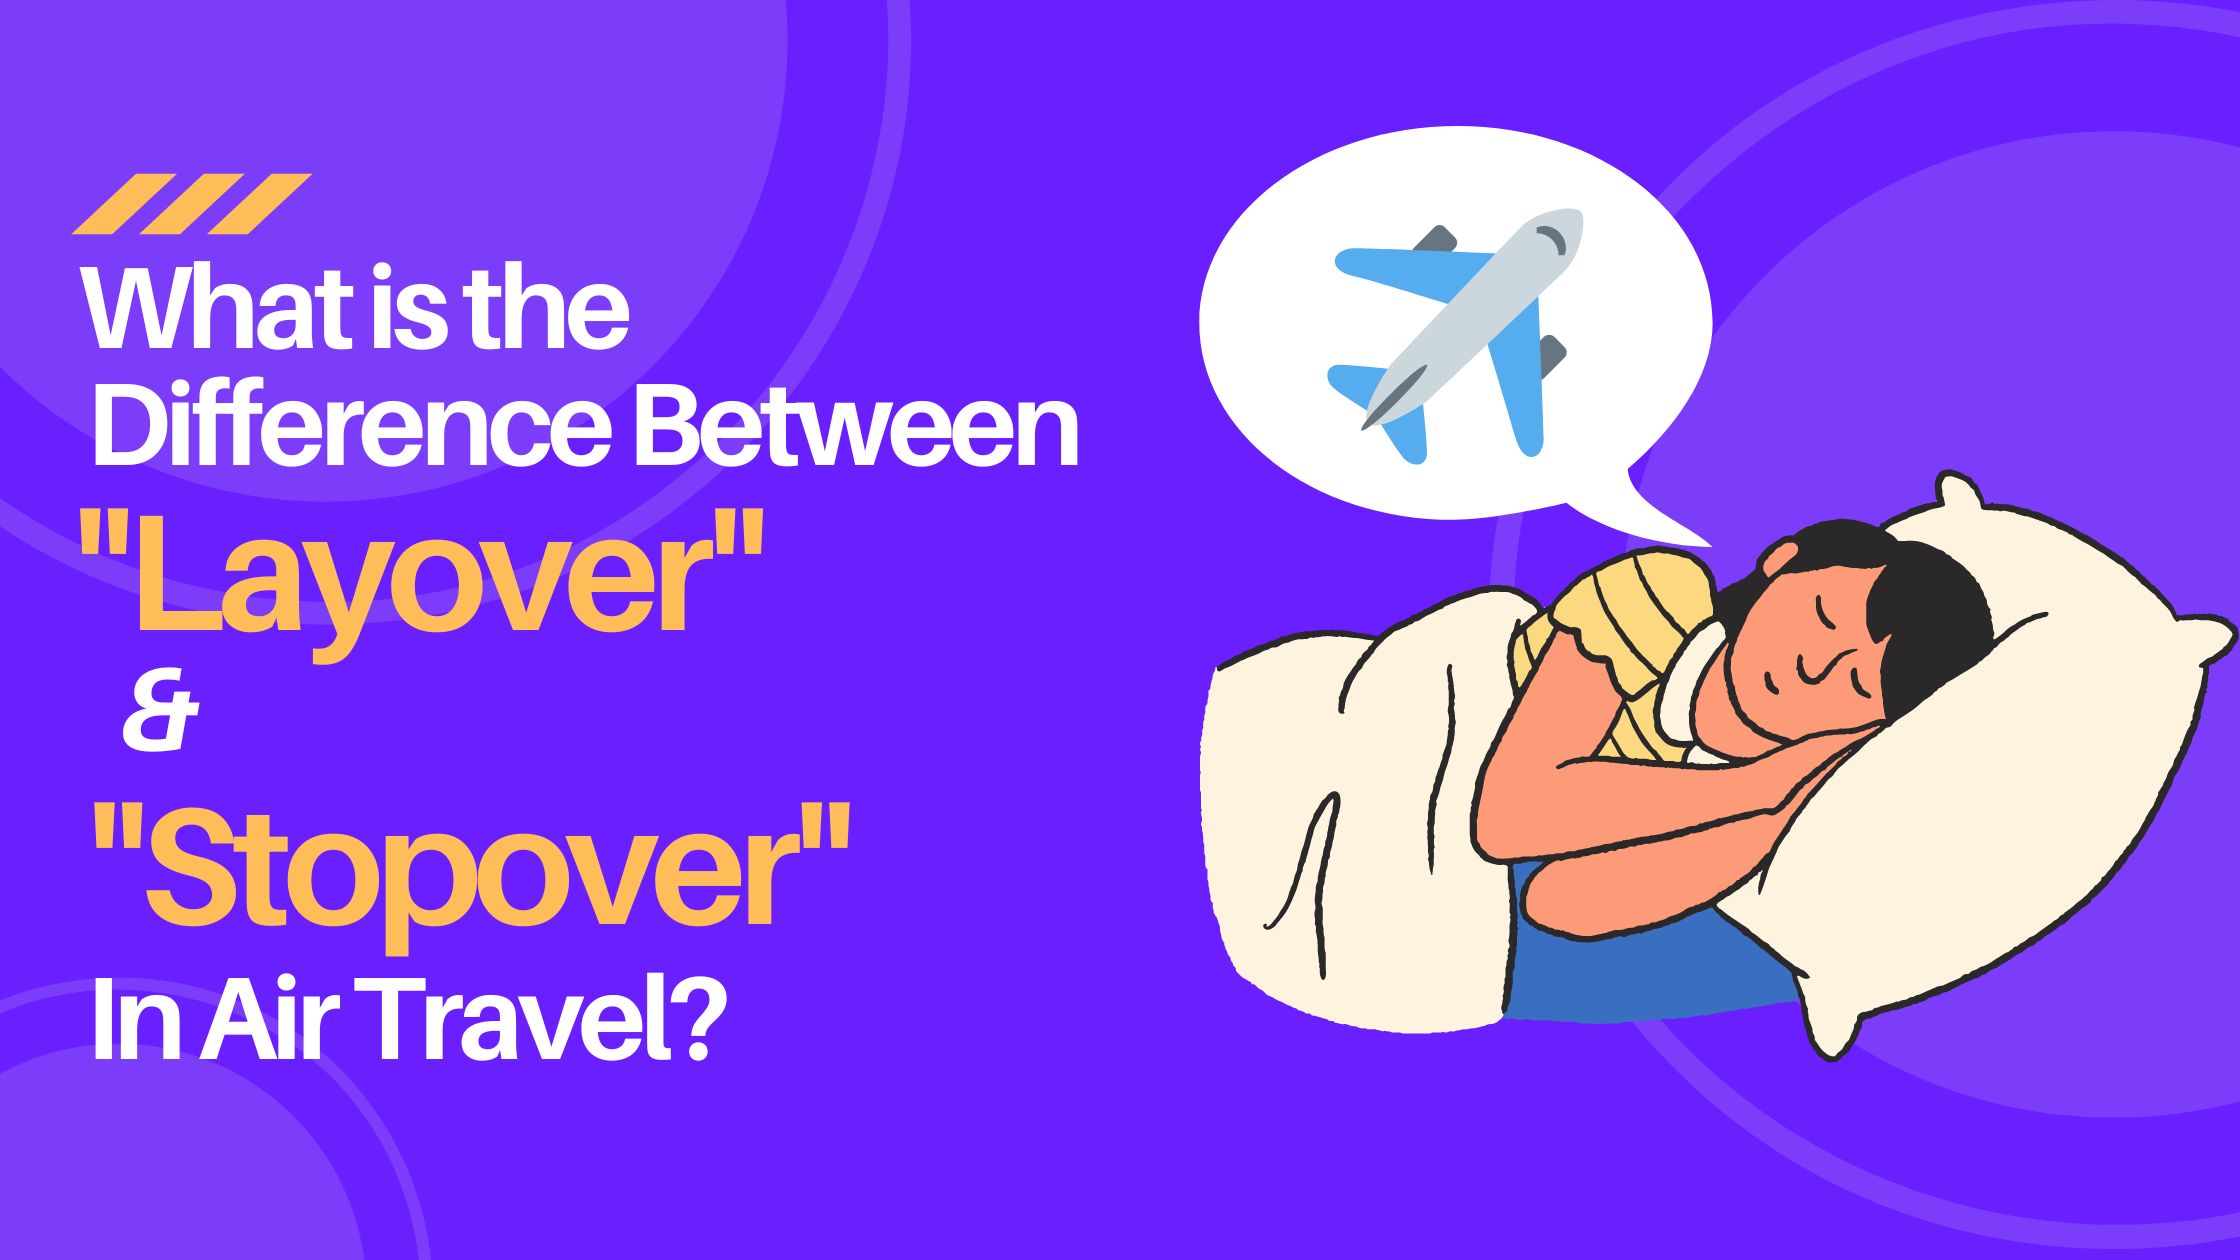 What Is The Difference Between "Layover" And "Stopover" In Air Travel?